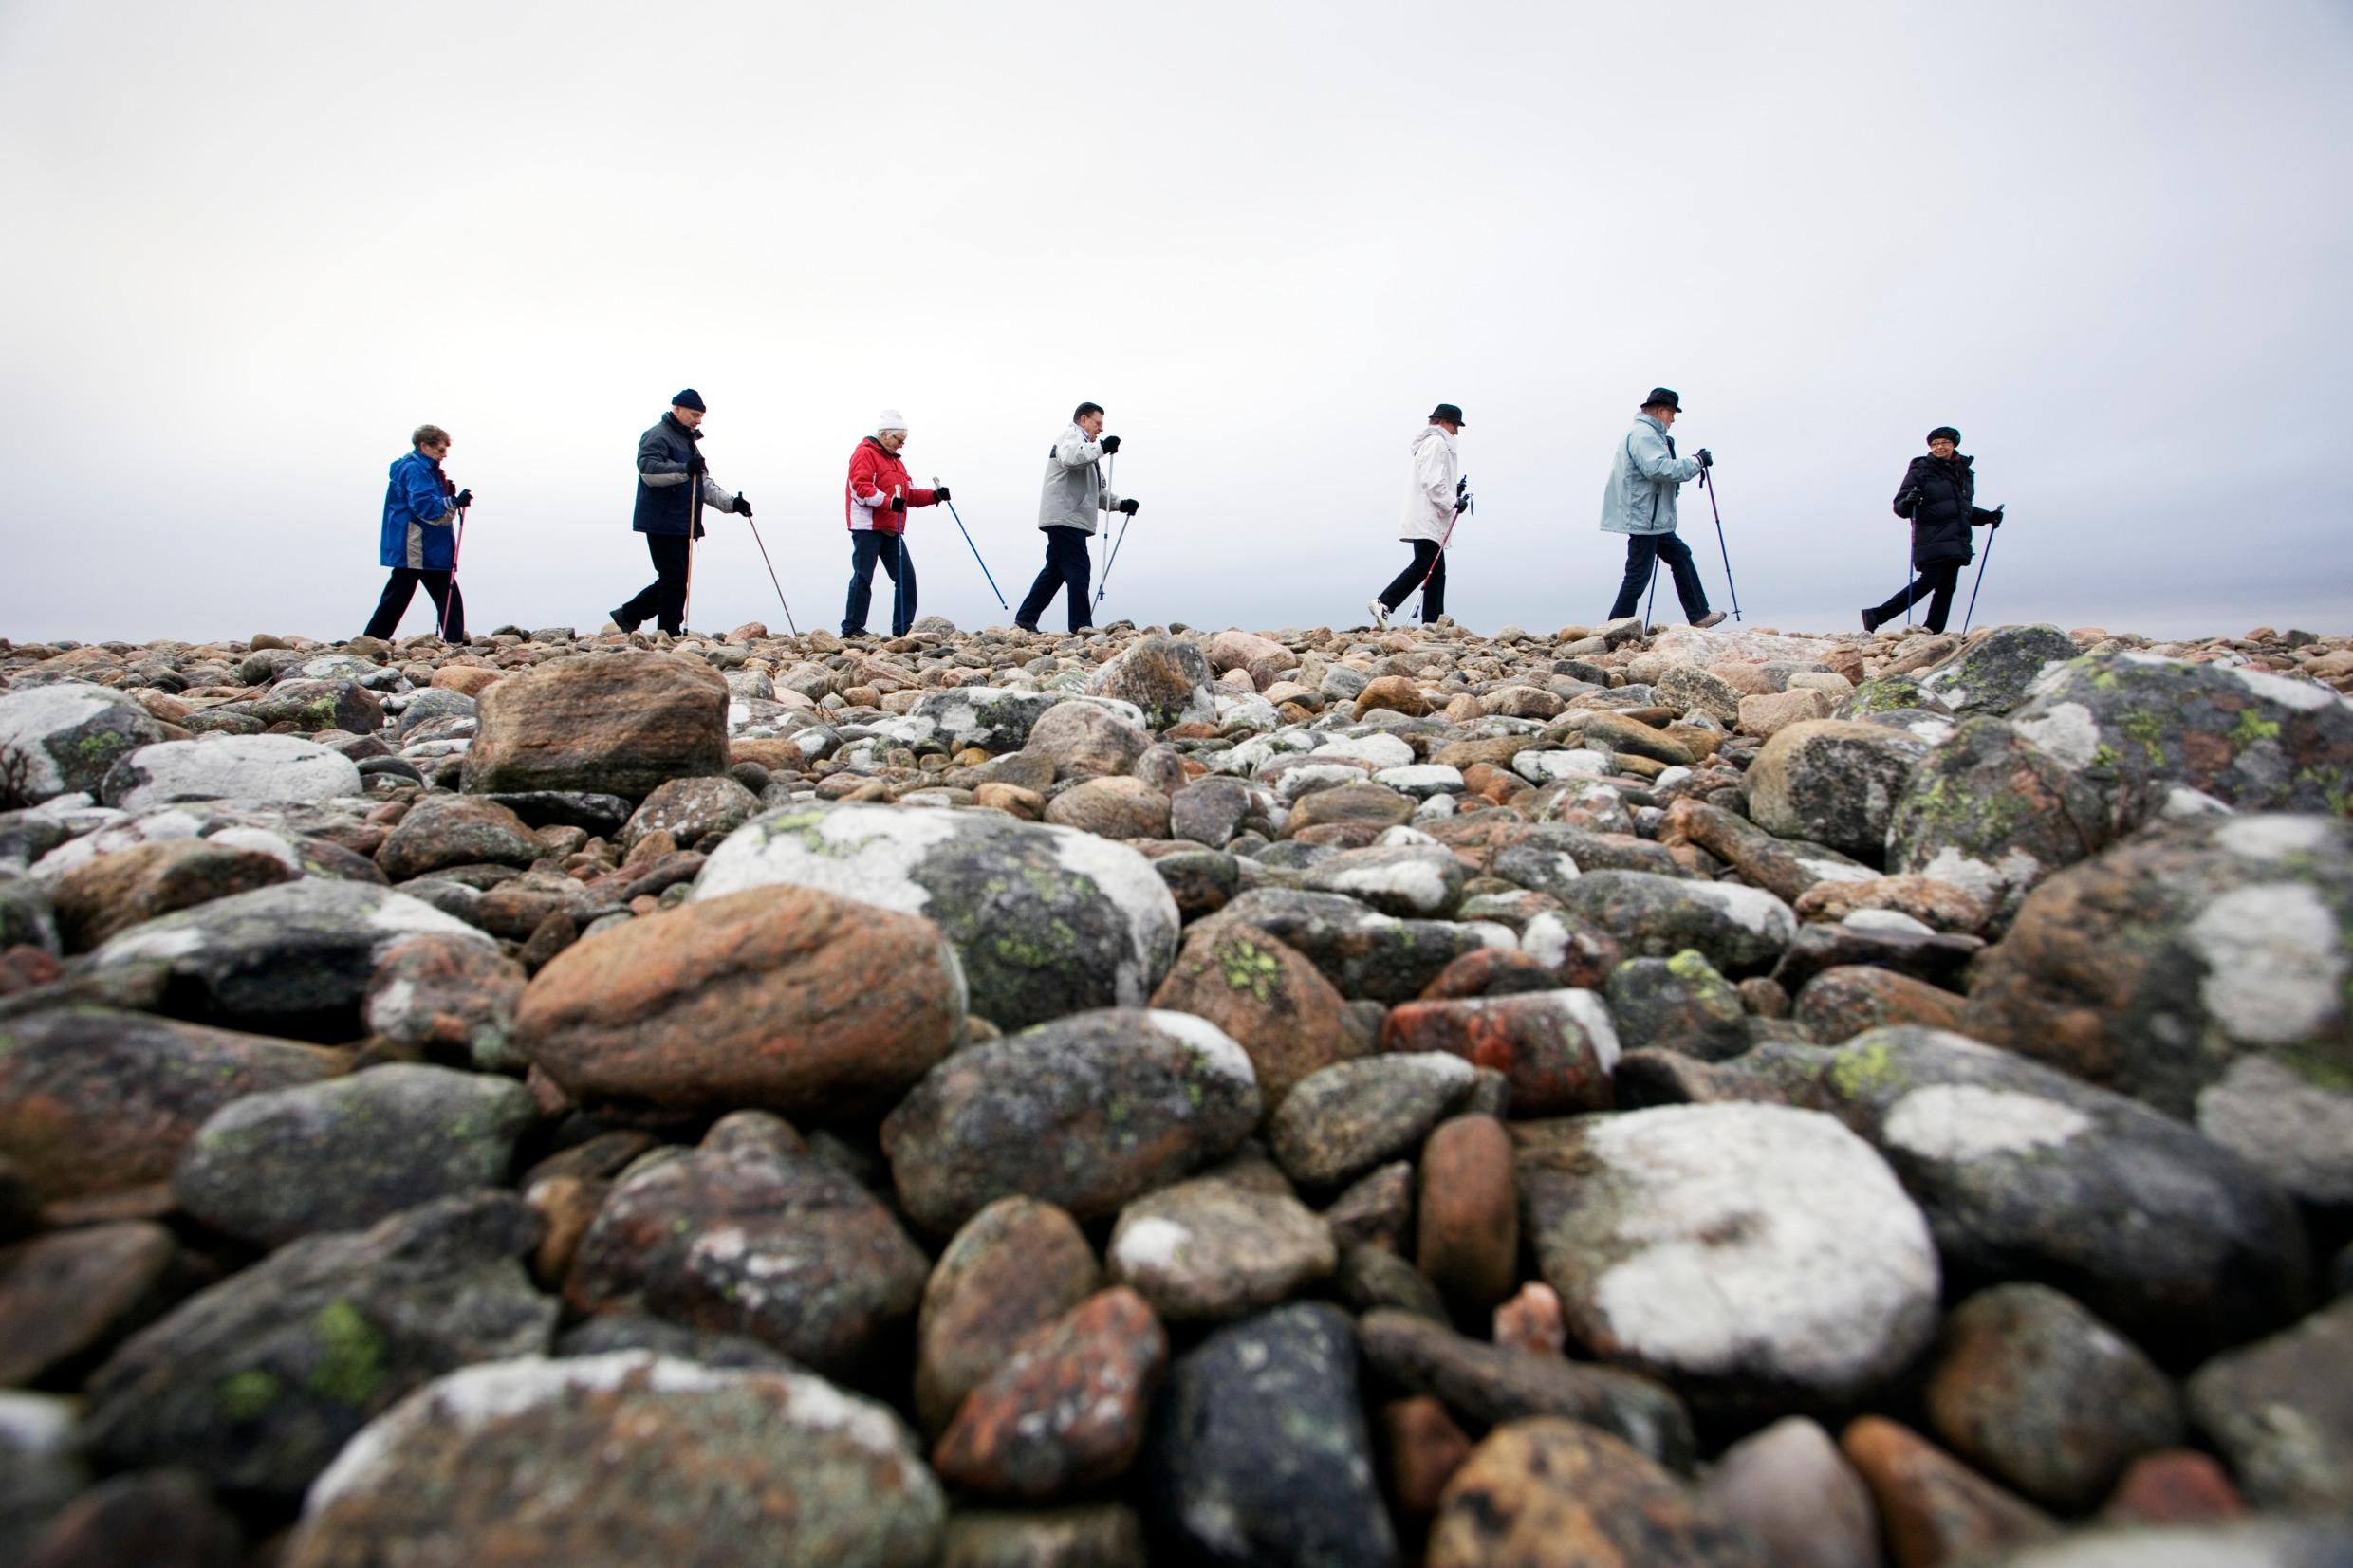 Seven people seen walking with sticks. Round stones in the foreground.